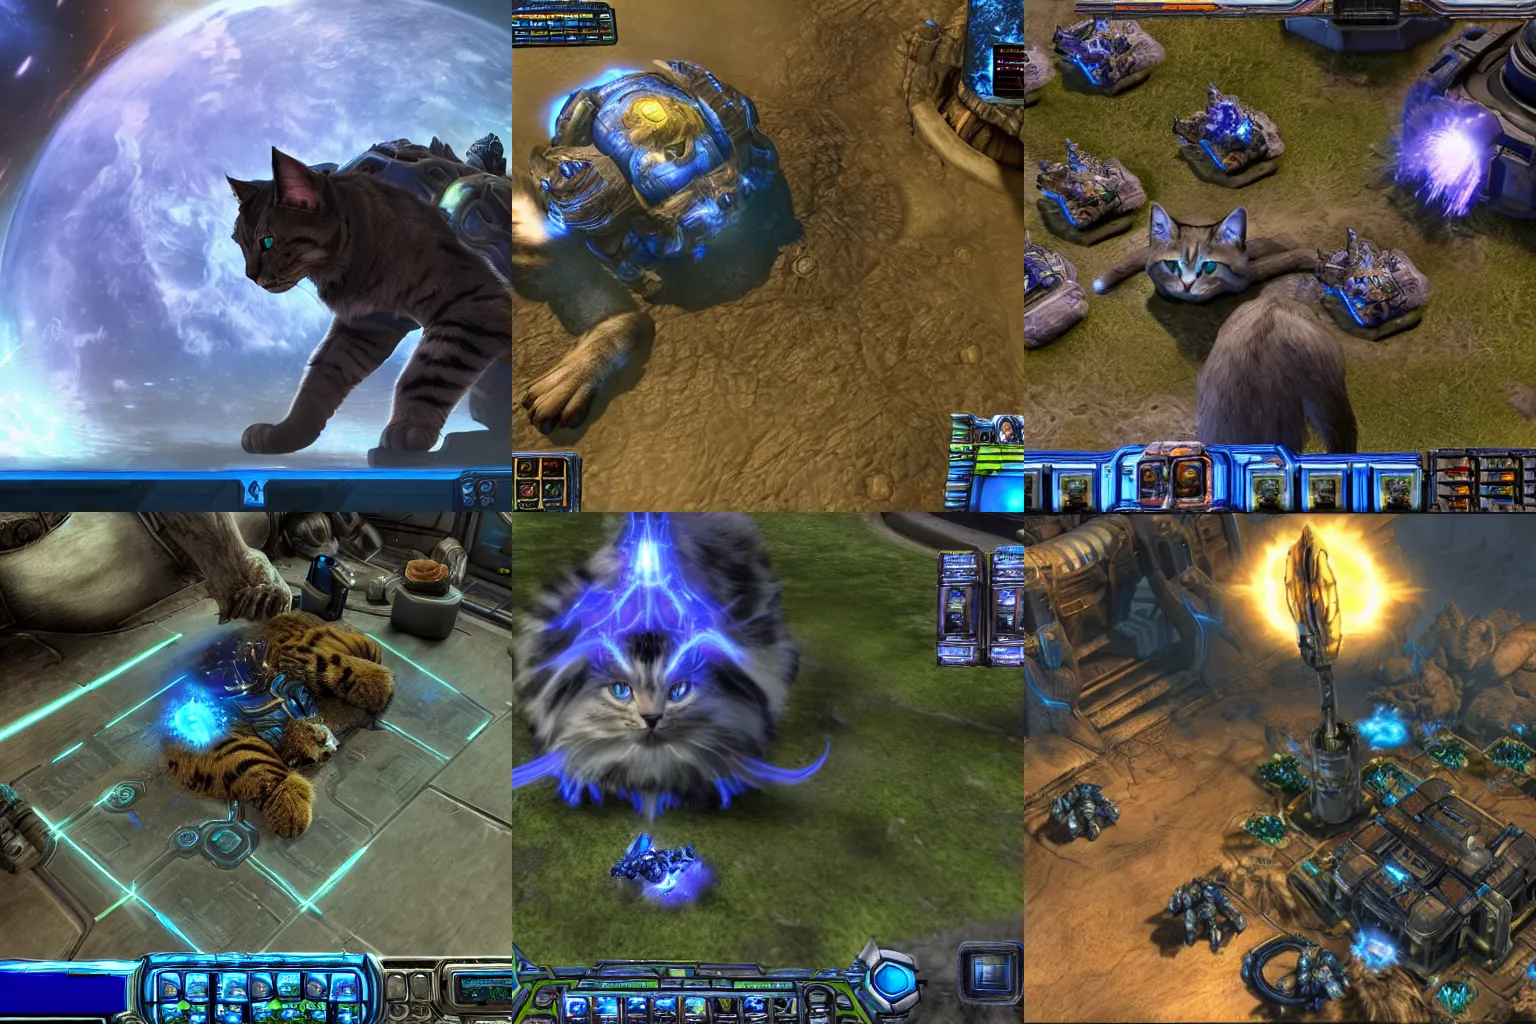 Prompt: screenshot of a giant cat sitting on a Starcraft 2 game